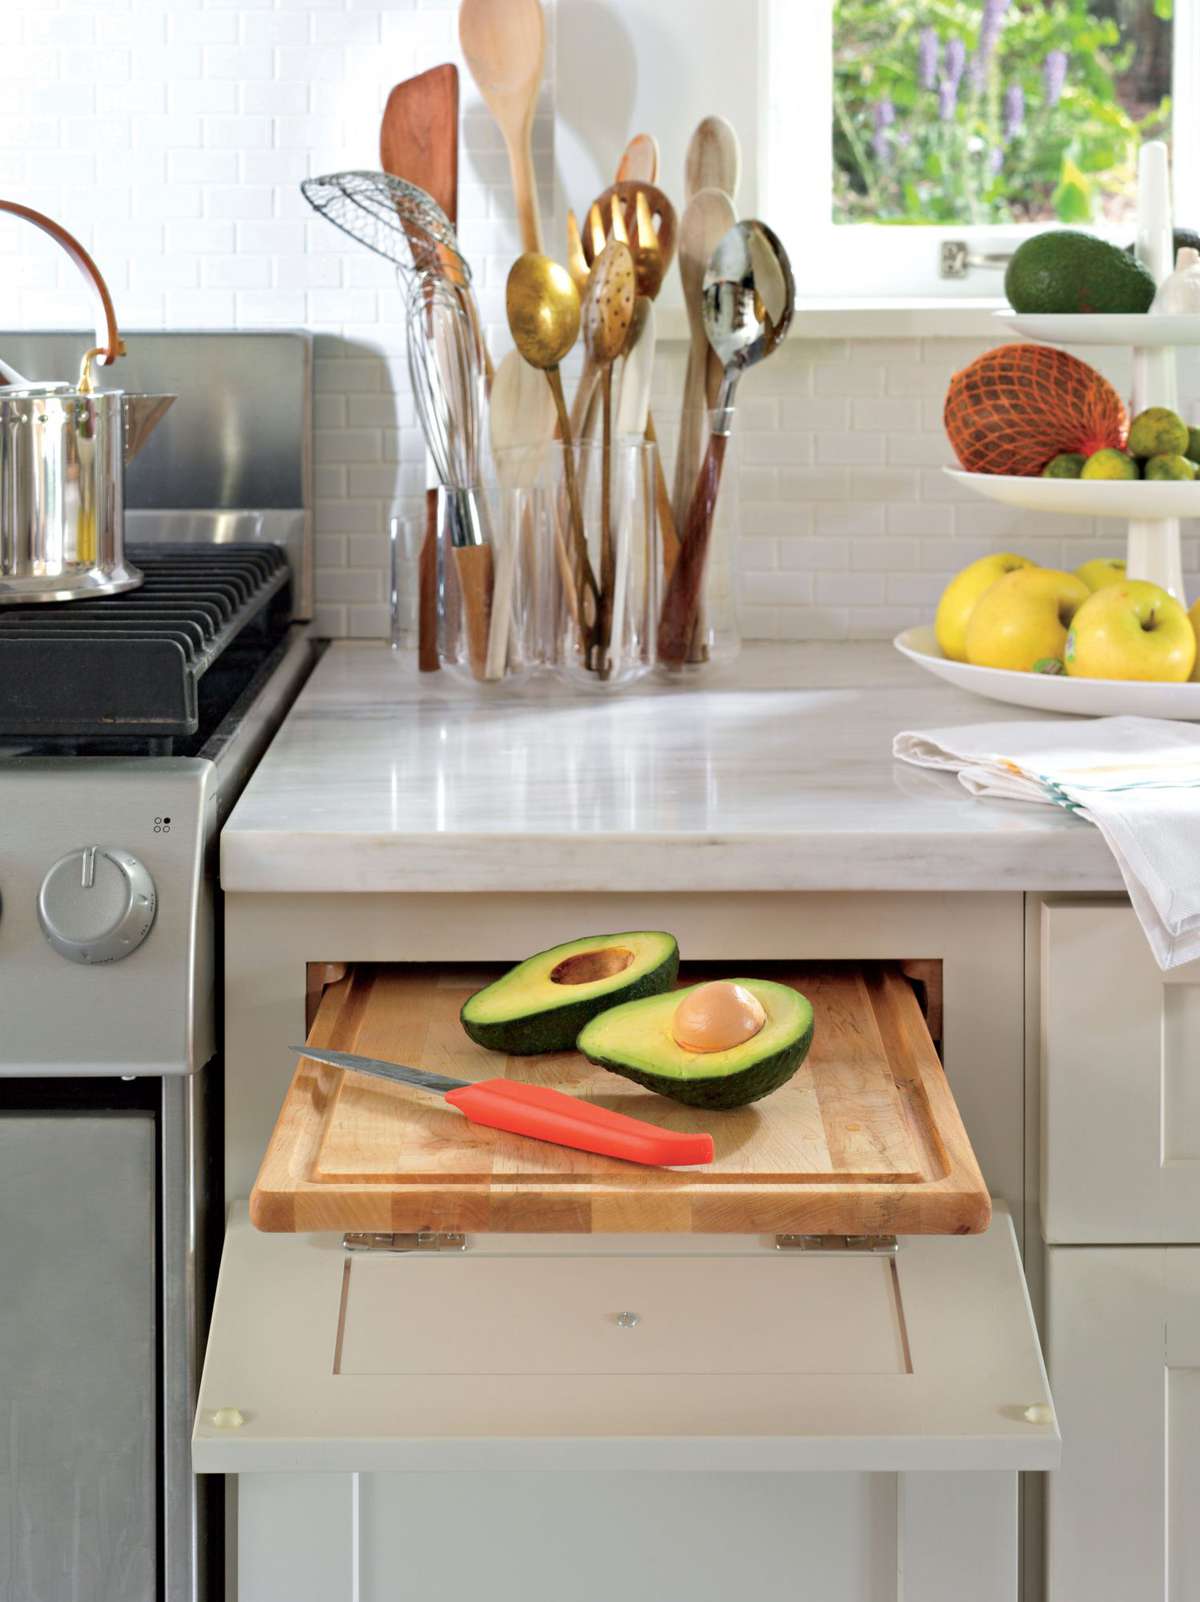 Cutting Board in Kitchen with Avocado